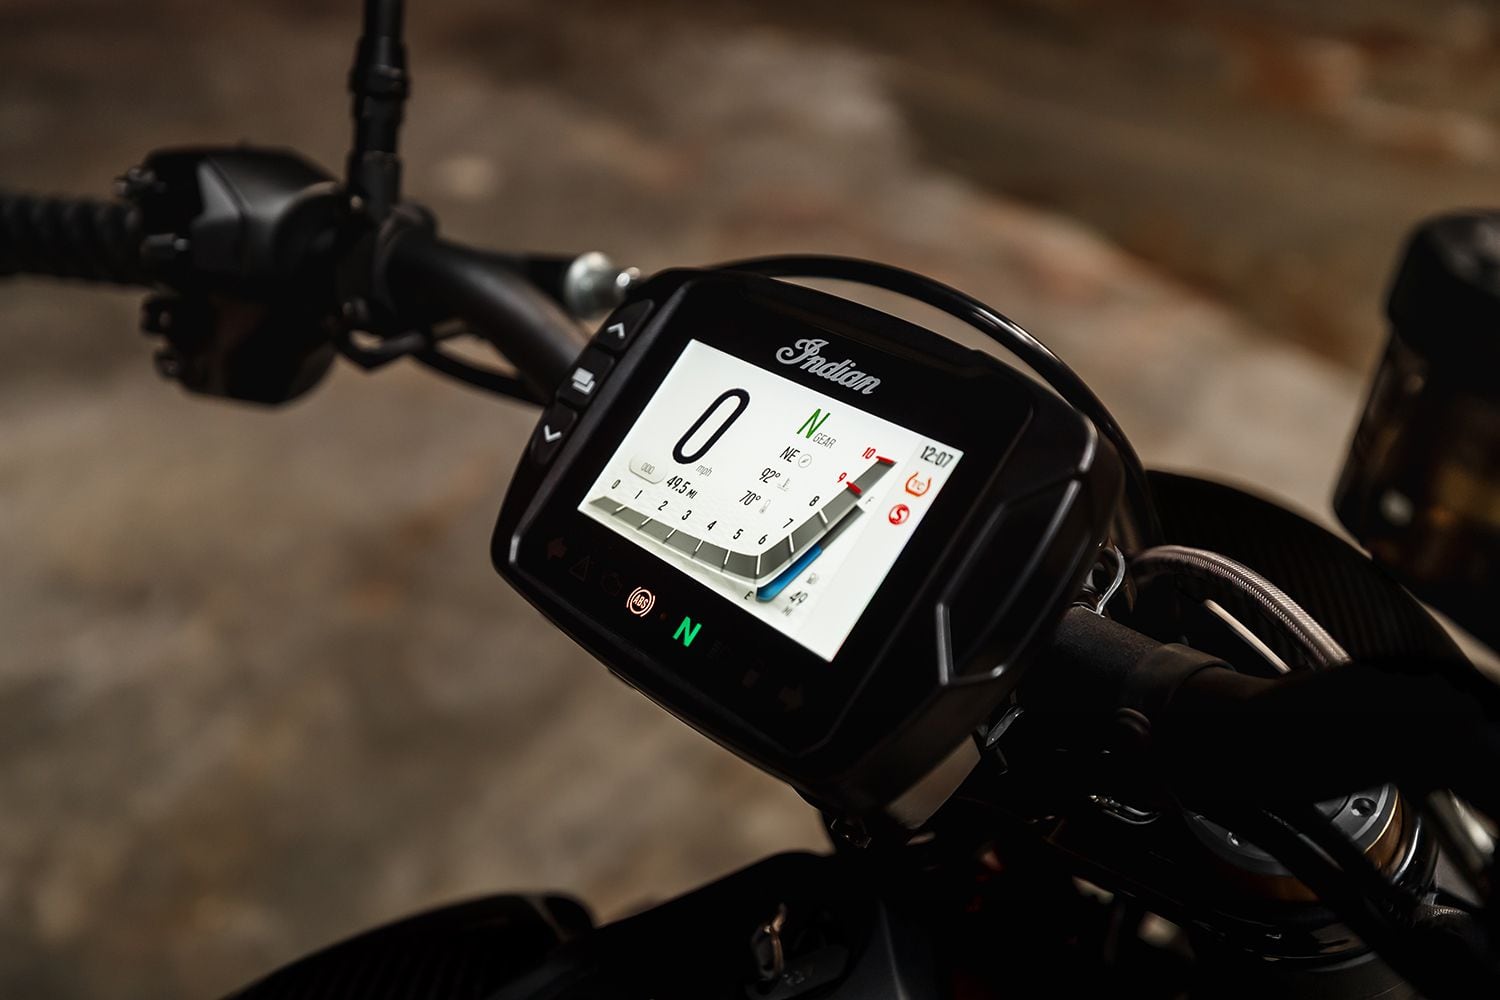 The FTR S and FTR R Carbon each come with a programmable 4.3-inch digital LCD gauge display.